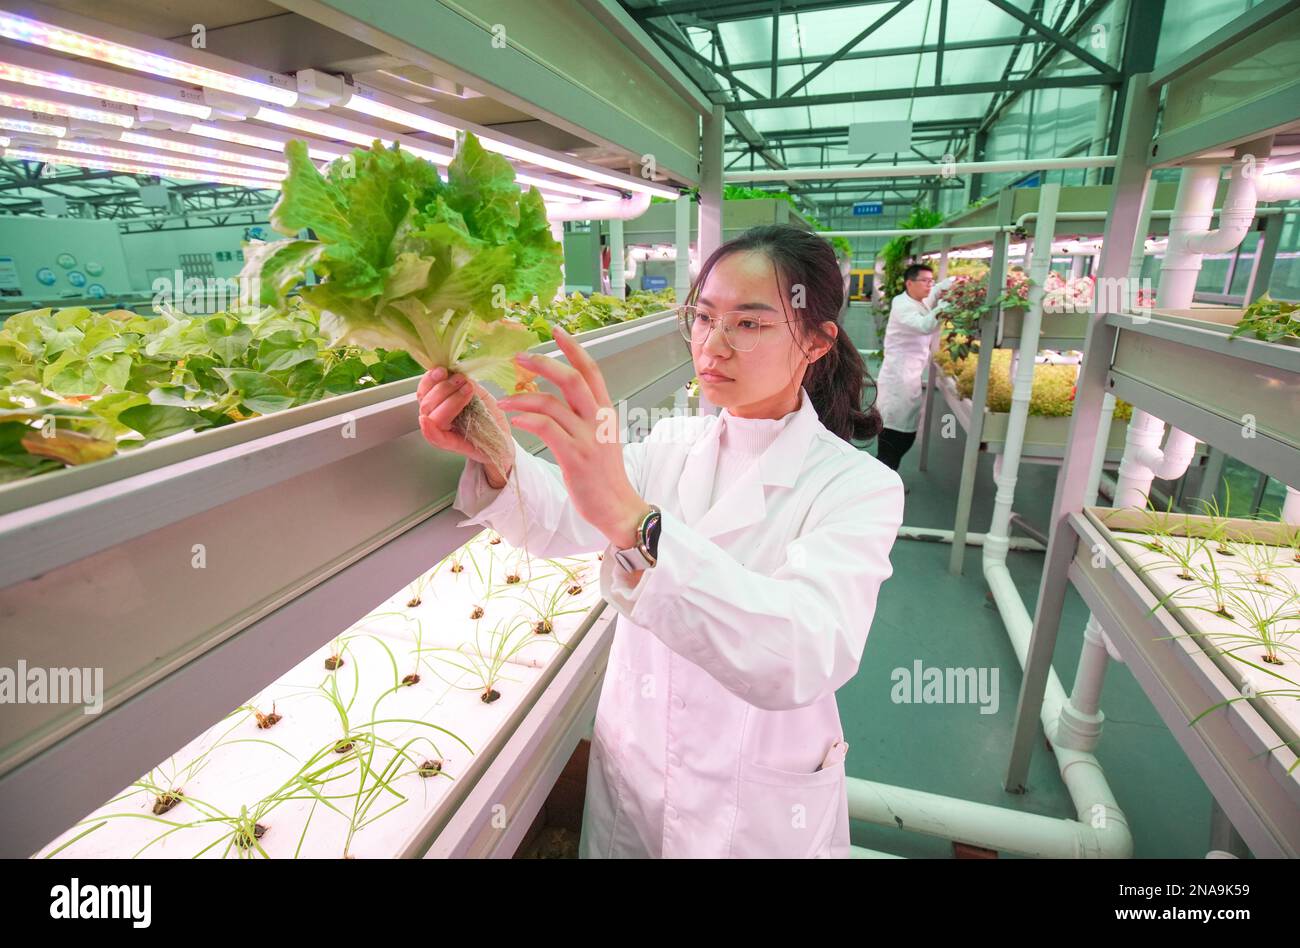 HUZHOU, CHINA - FEBRUARY 13, 2023 - A worker takes care of soilless vegetables at Baiyuankang Plant Dream Factory in Dongheng Village, Luoshe town, De Stock Photo